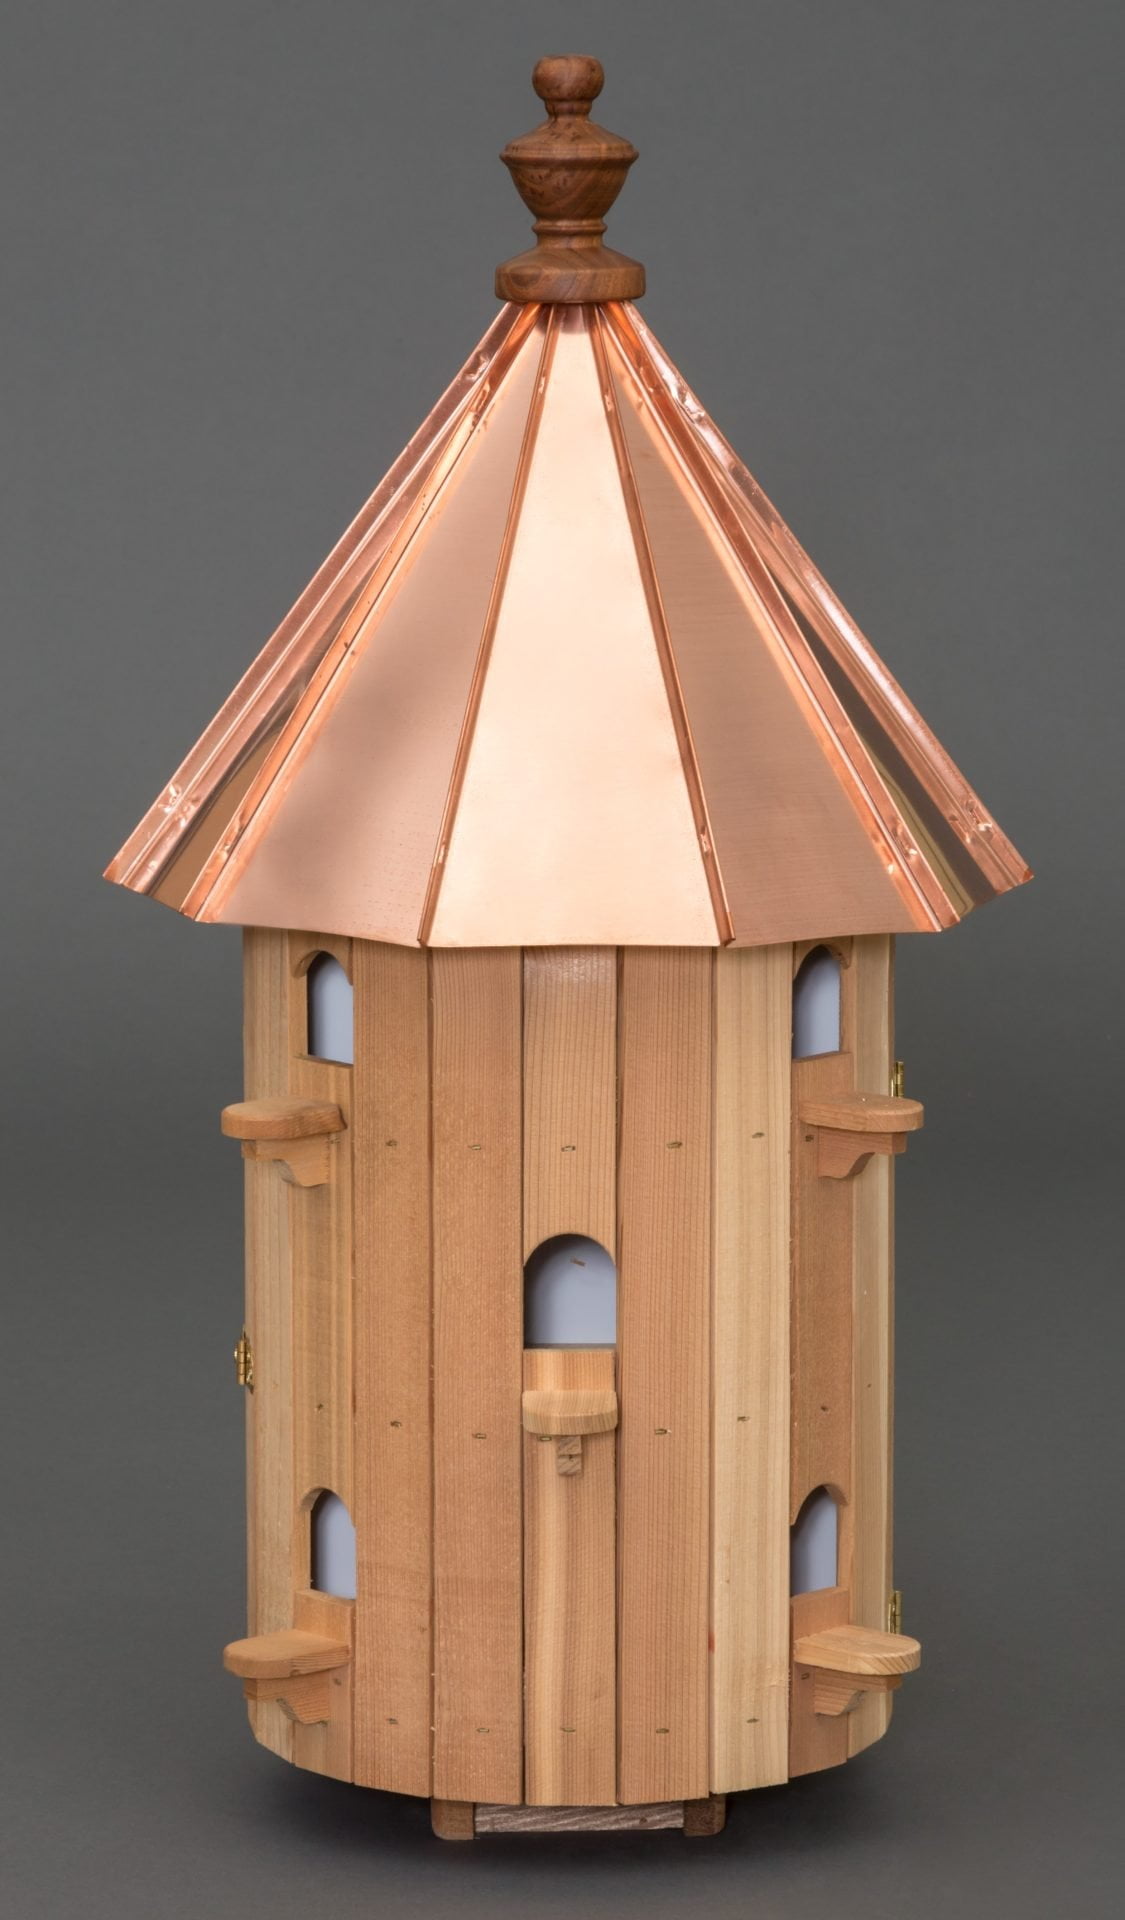 10-Hole High-Roof Cedar Bird House with Copper Roof